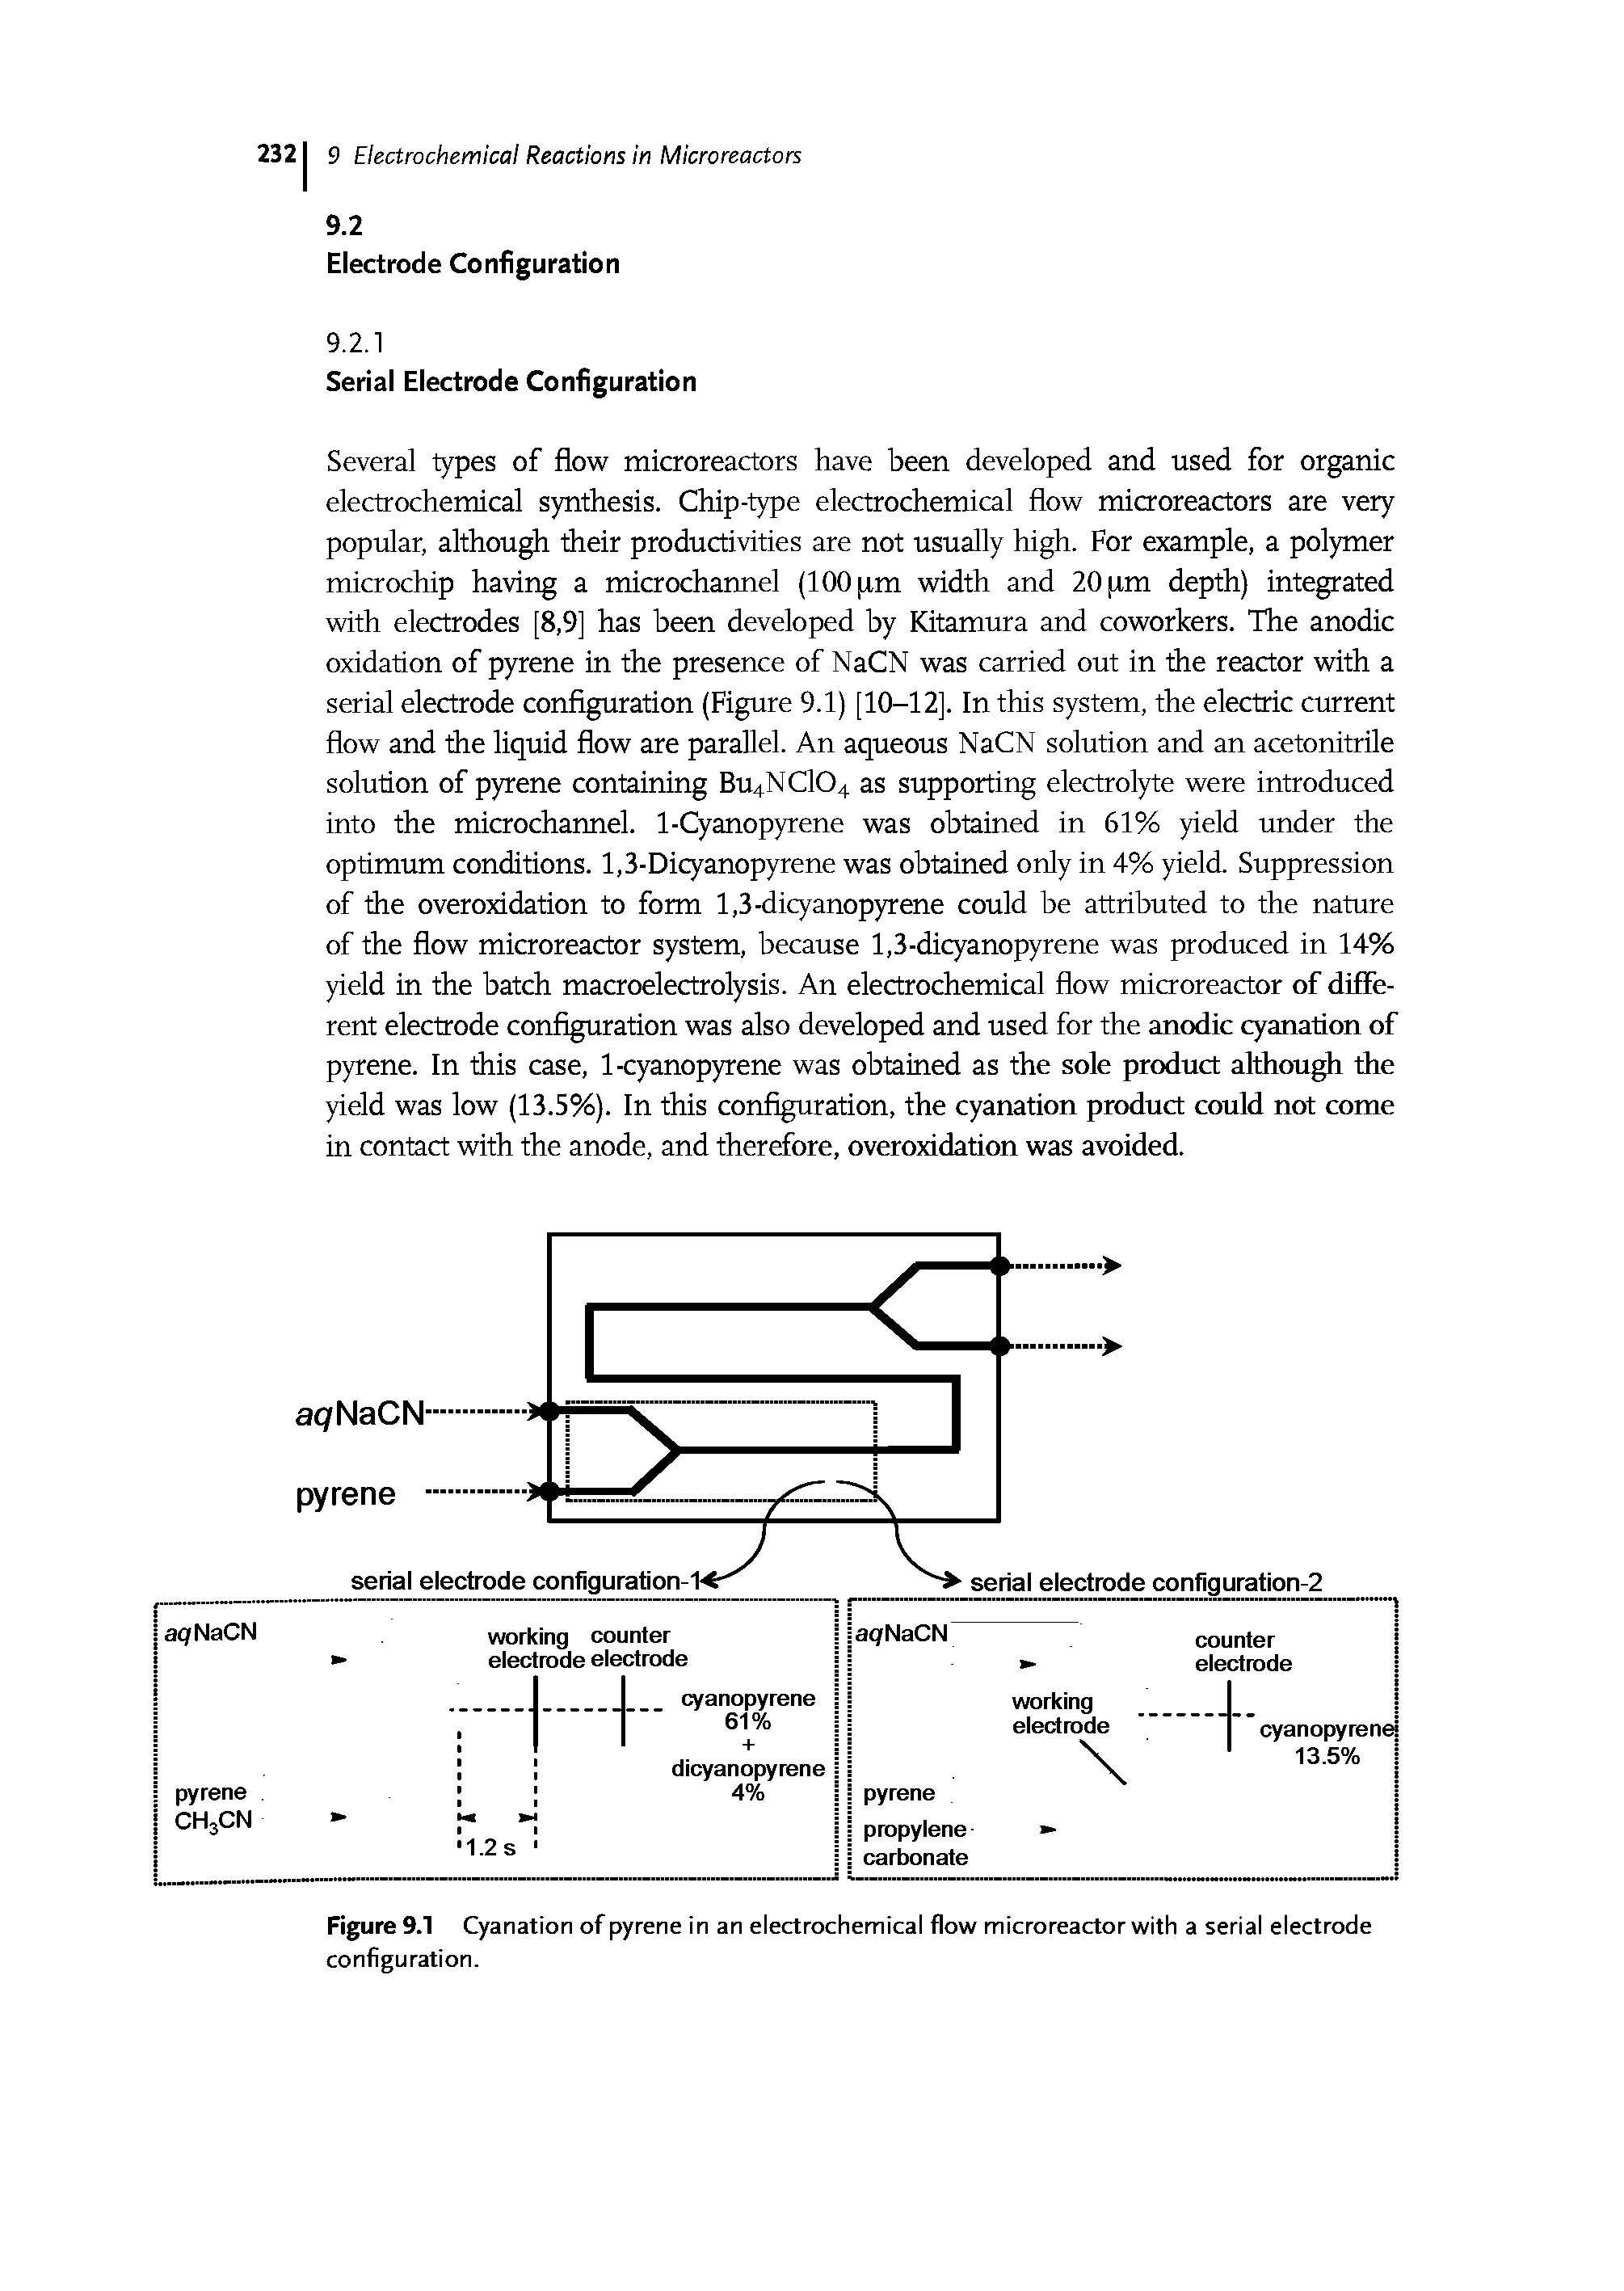 Figure 9.1 Cyanation of pyrene in an electrochemical flow microreactor with a serial electrode configuration.